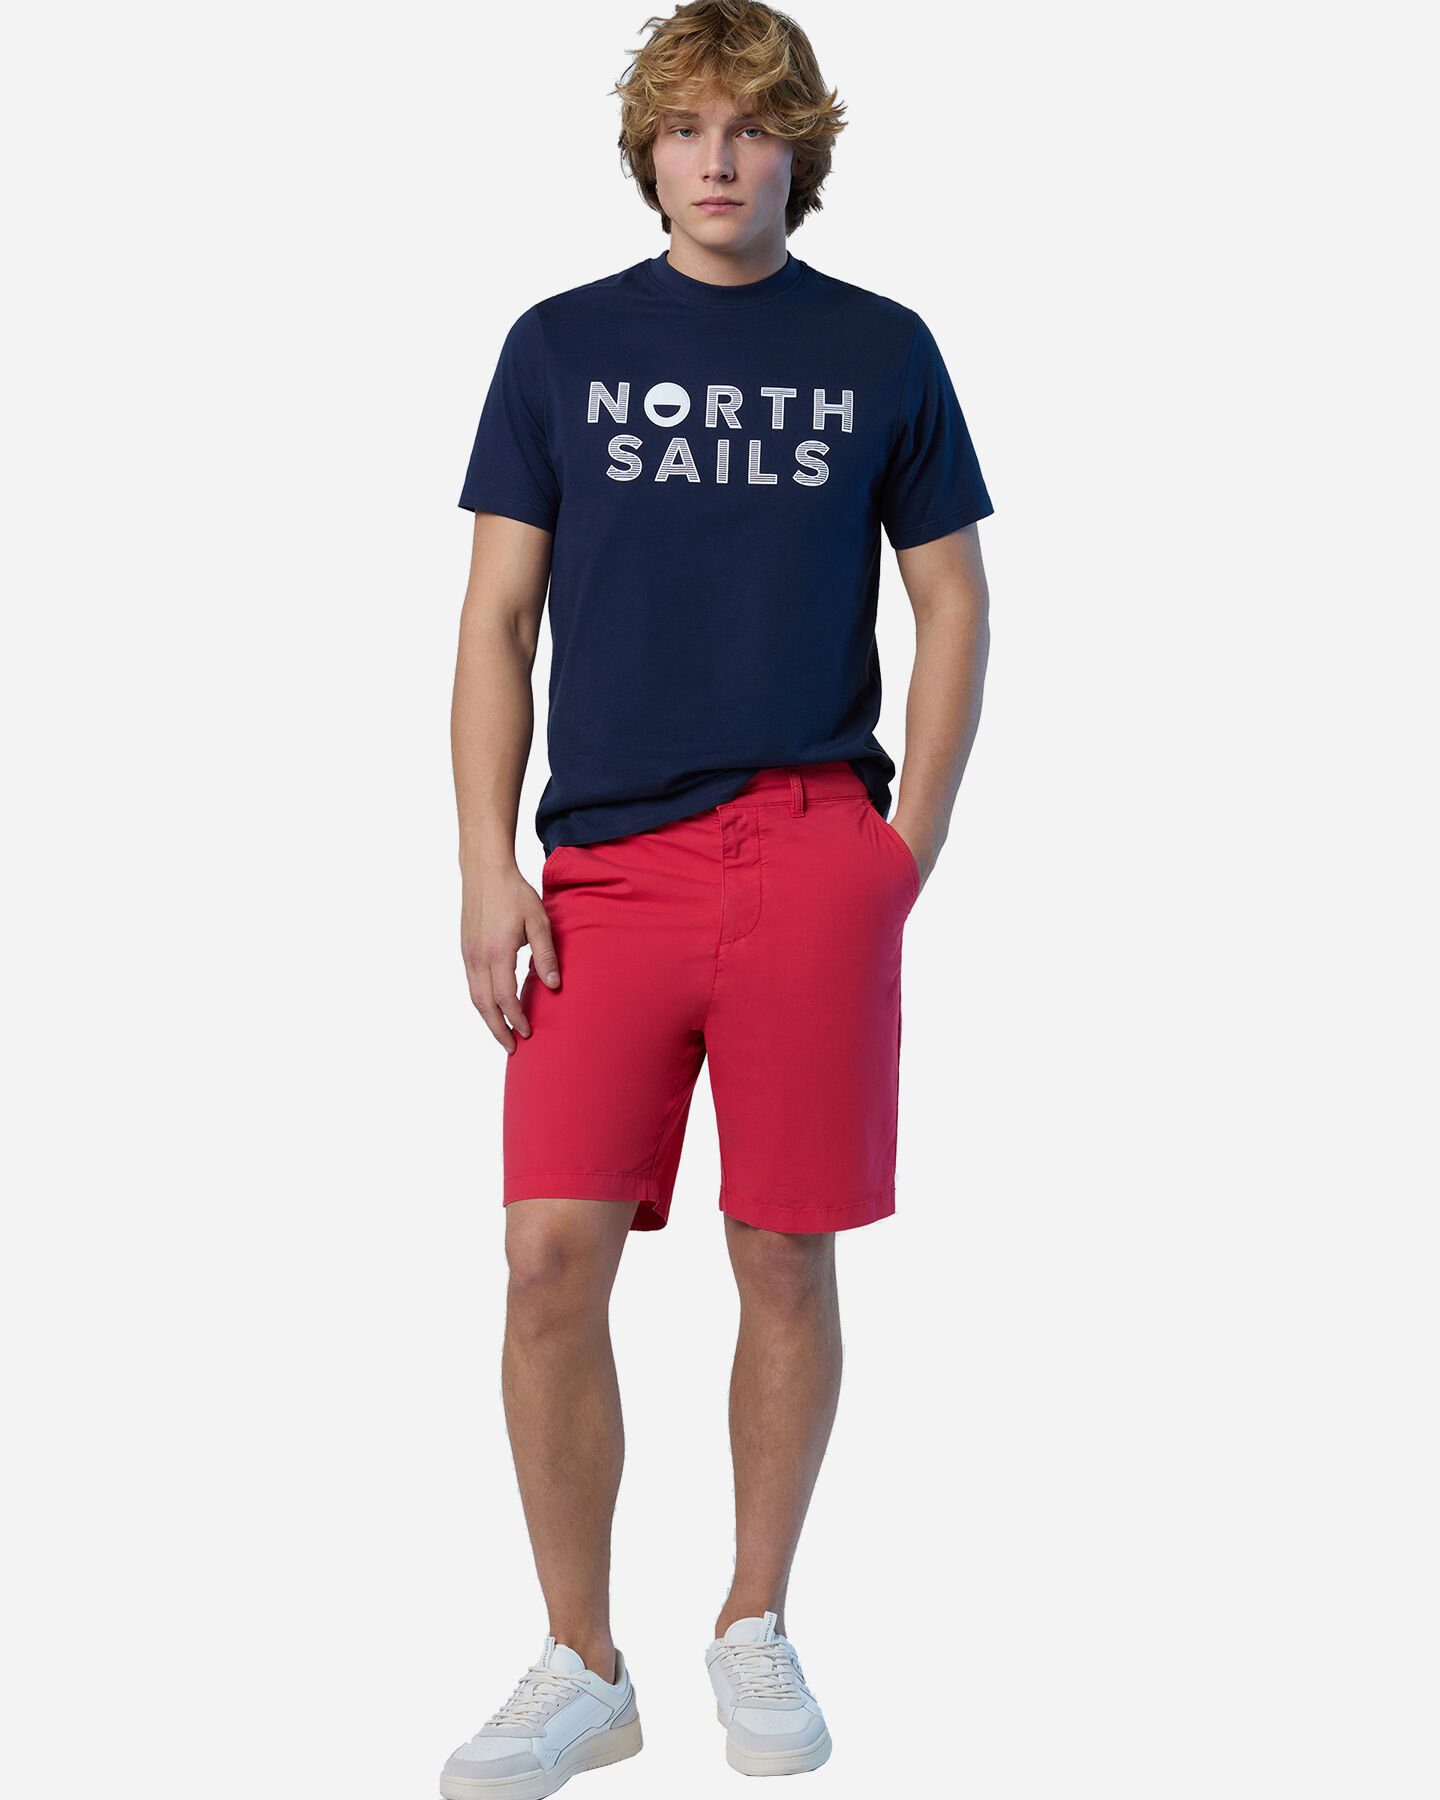  T-Shirt NORTH SAILS NEW LOGO M S5697986|0802|S scatto 5